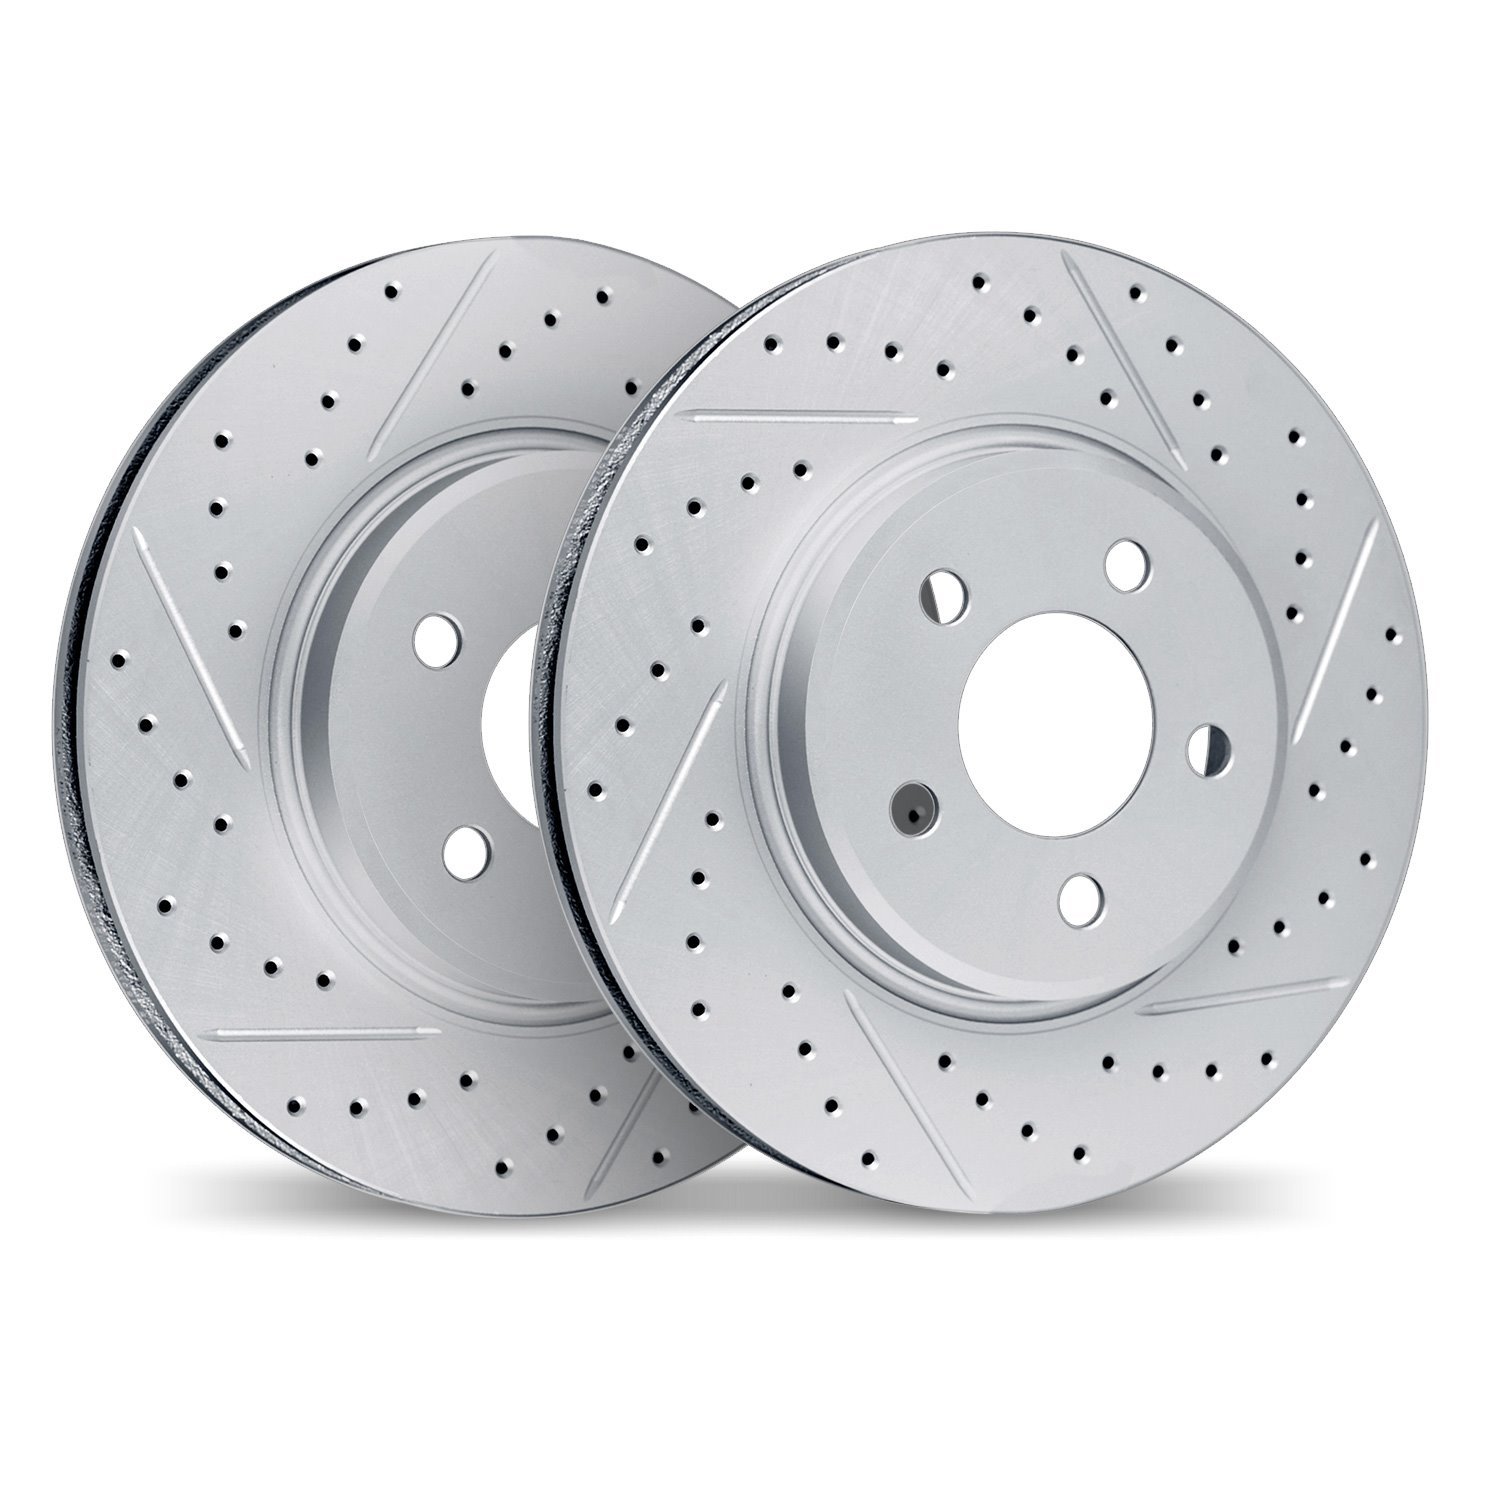 2002-54051 Geoperformance Drilled/Slotted Brake Rotors, 1997-1999 Ford/Lincoln/Mercury/Mazda, Position: Front